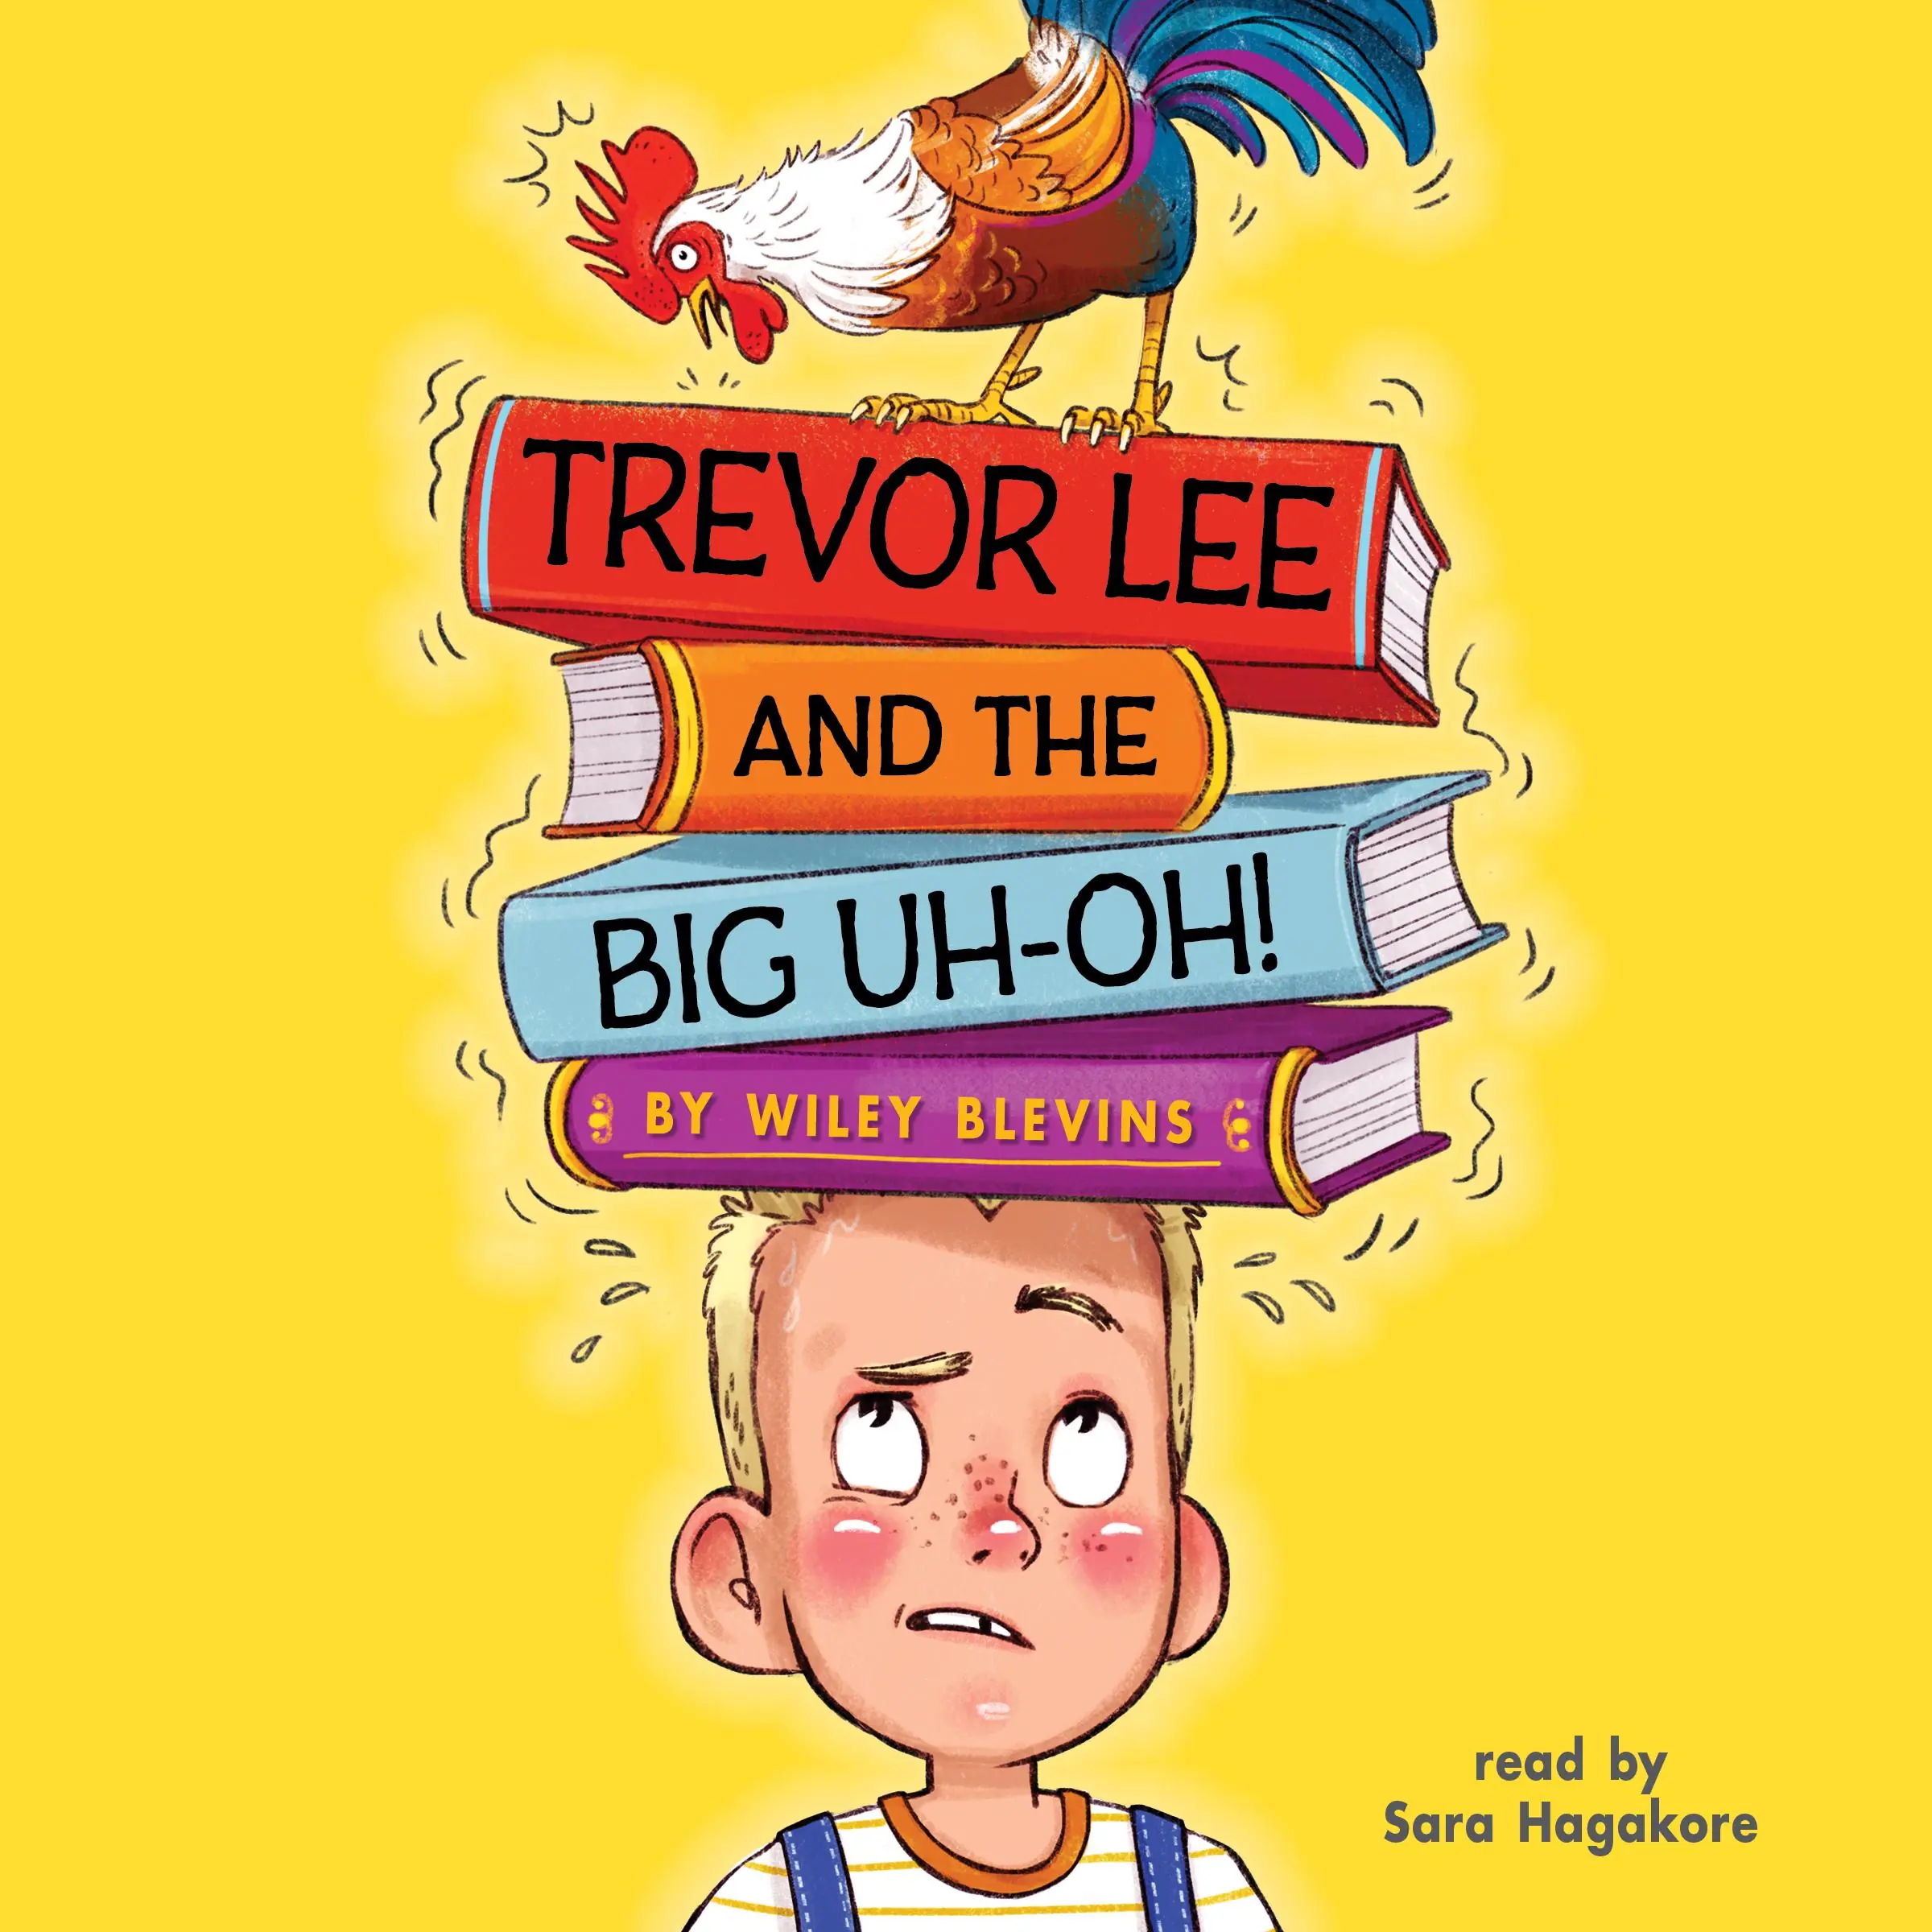 Trevor Lee and the Big Uh-Oh! Audiobook by Wiley Blevins